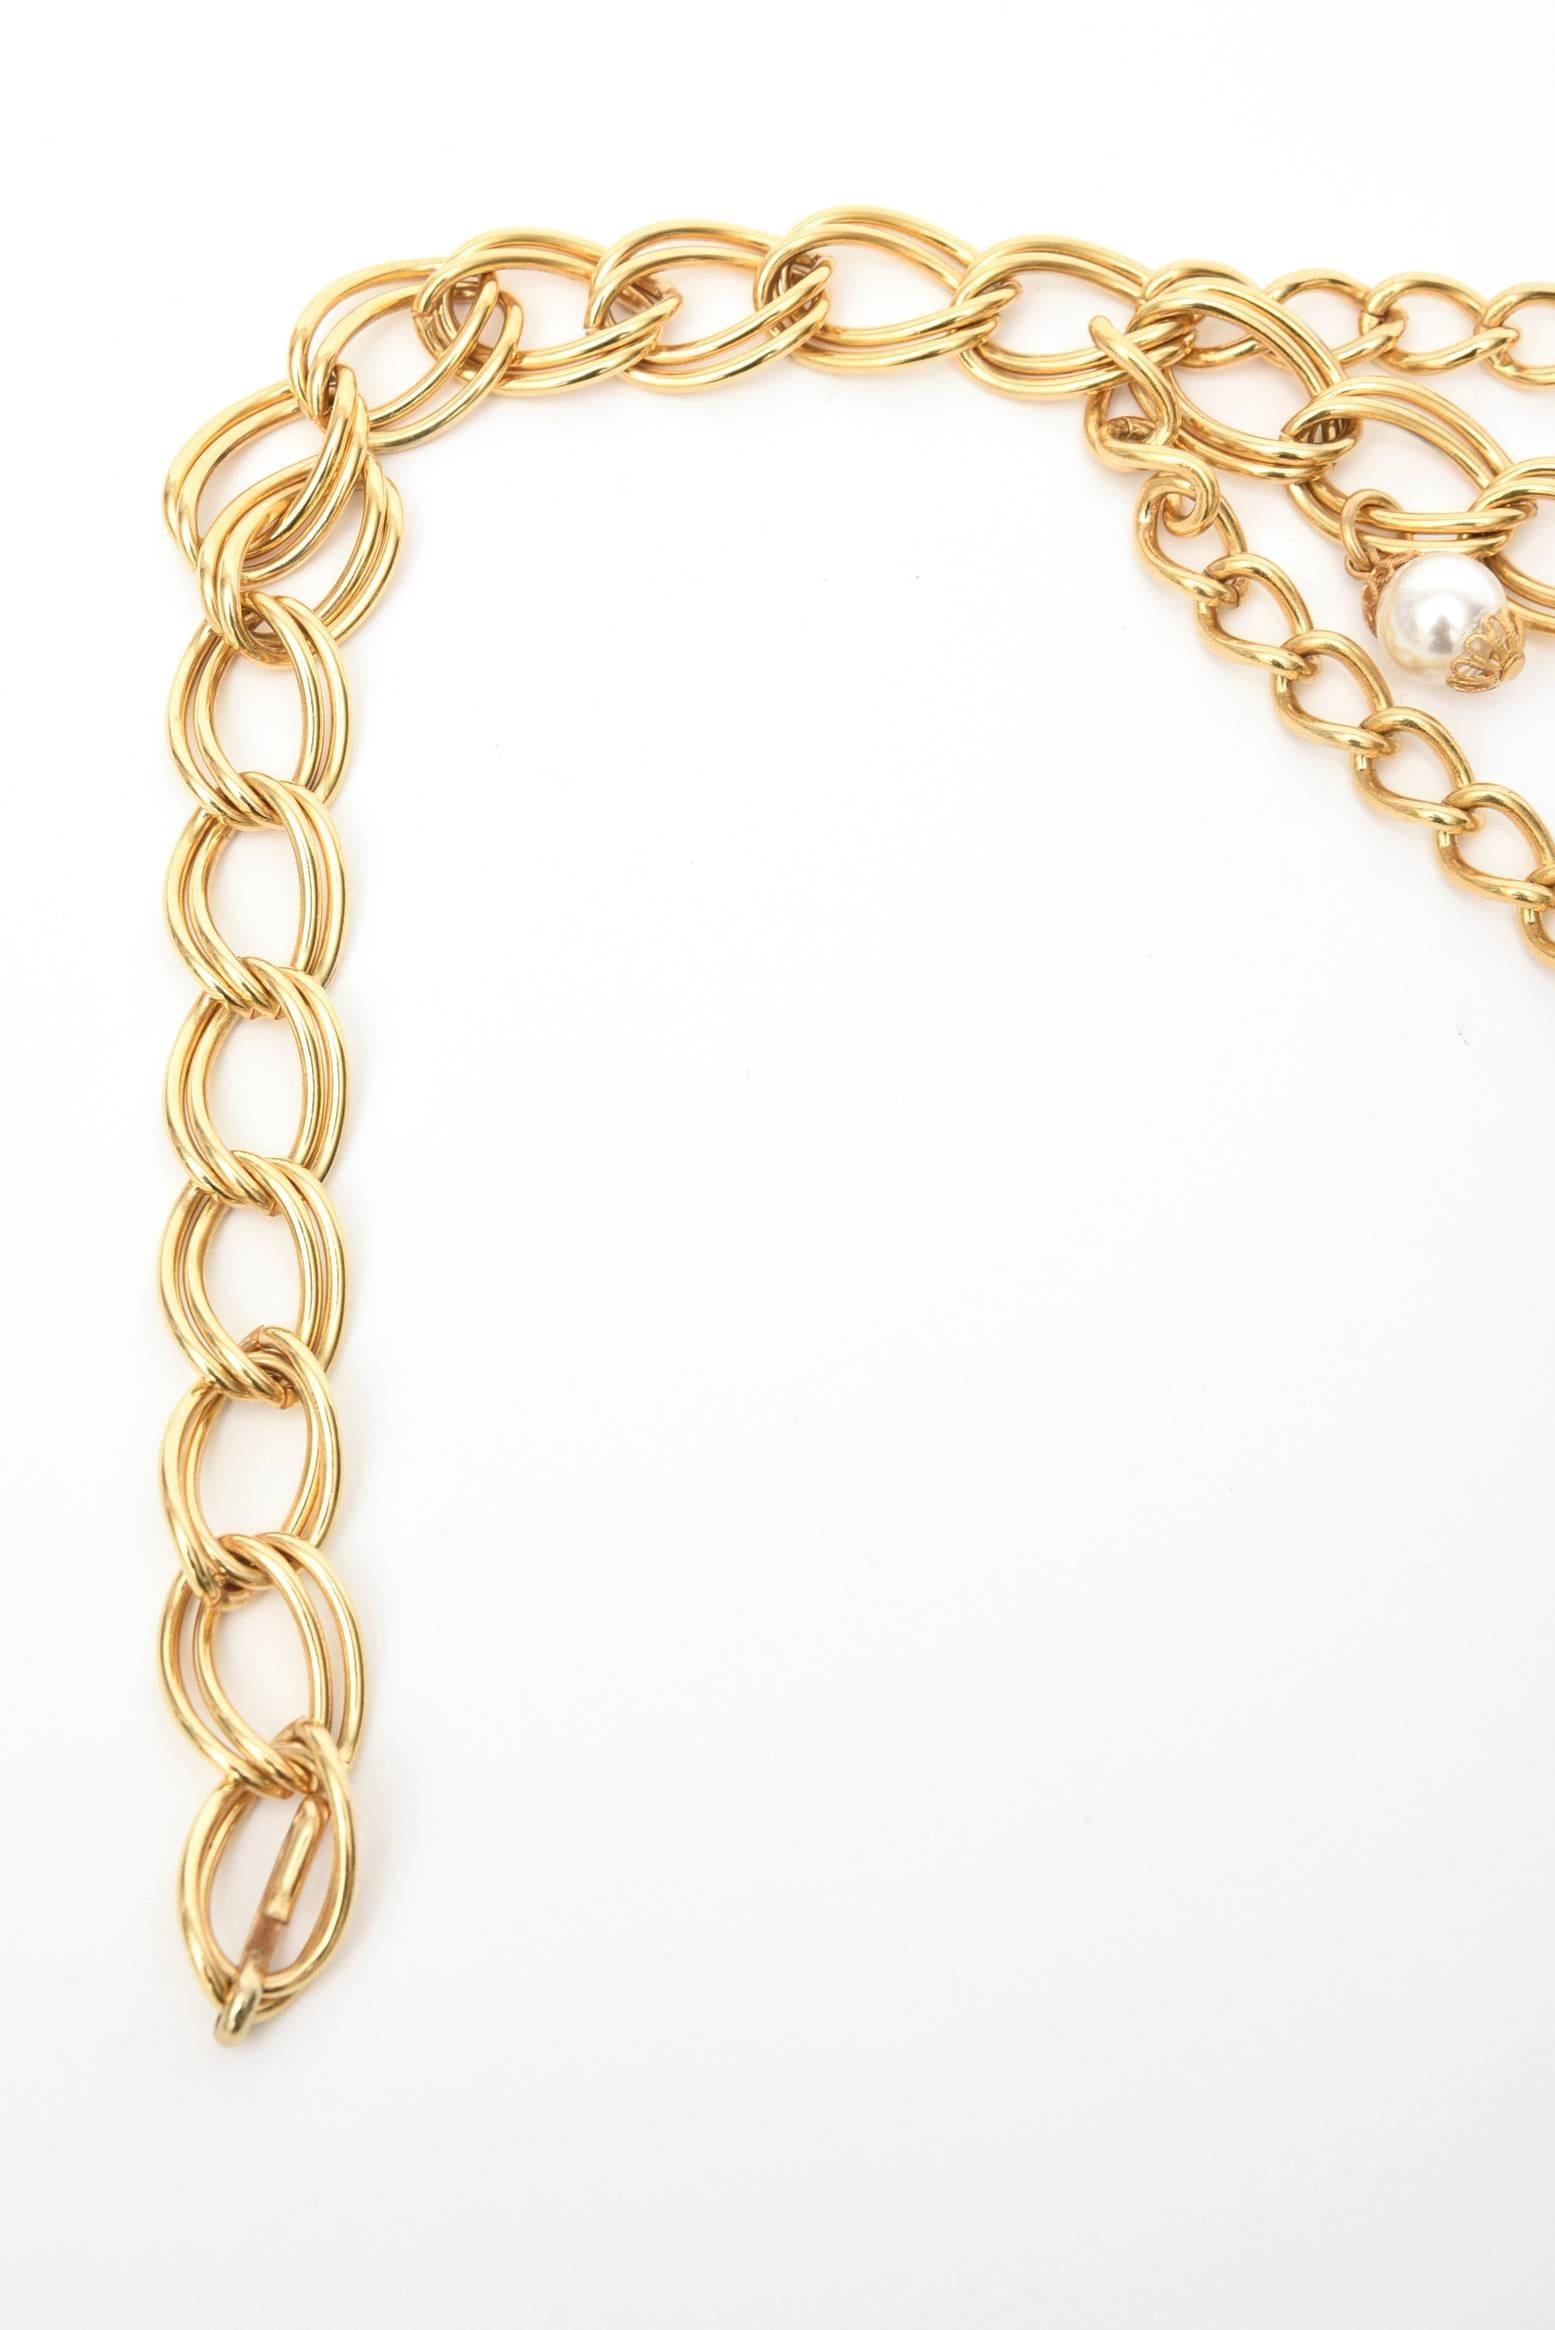 Women's Gold Plated Chain Link Belt with Faux Pearl and Resin Dangles Vintage